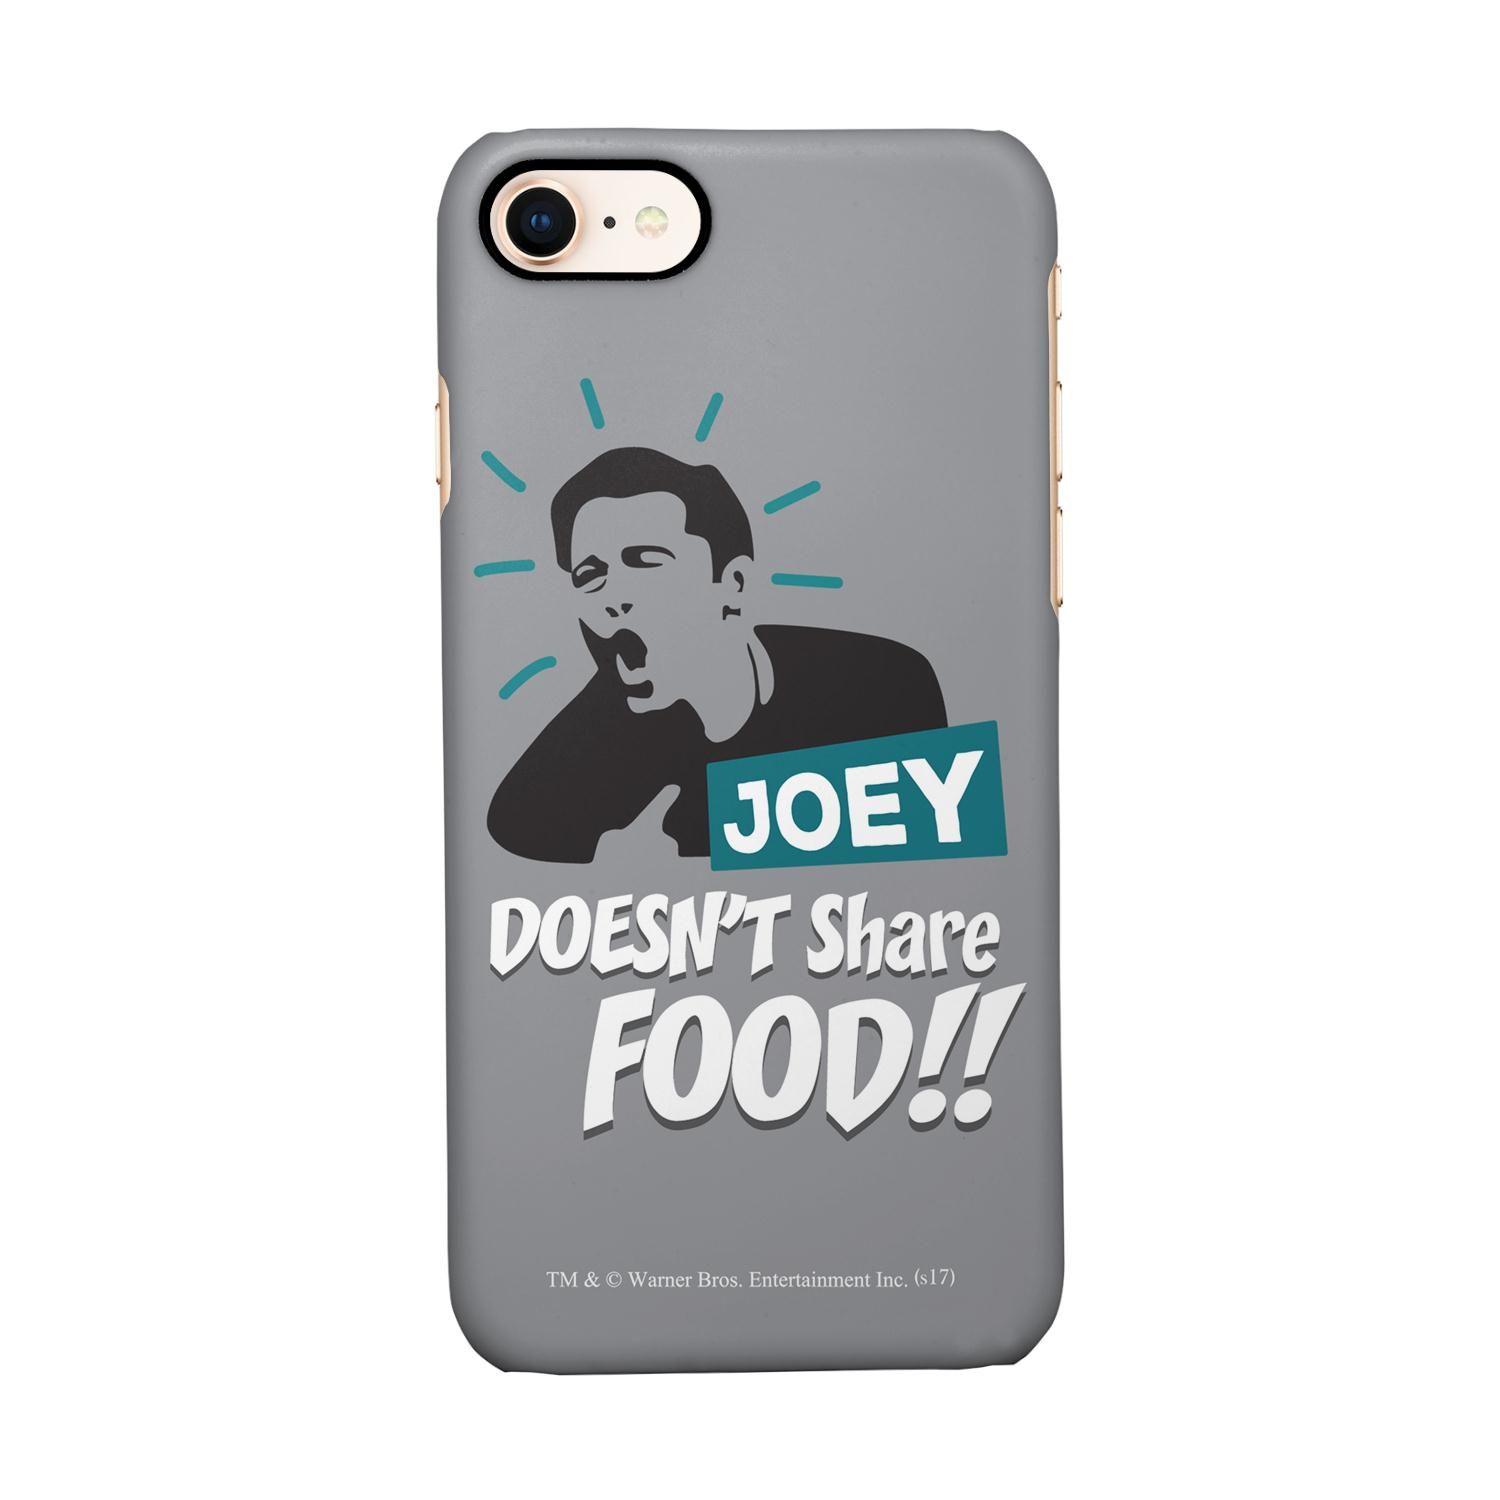 Buy Friends Joey doesnt share food - Sleek Phone Case for iPhone 7 Online